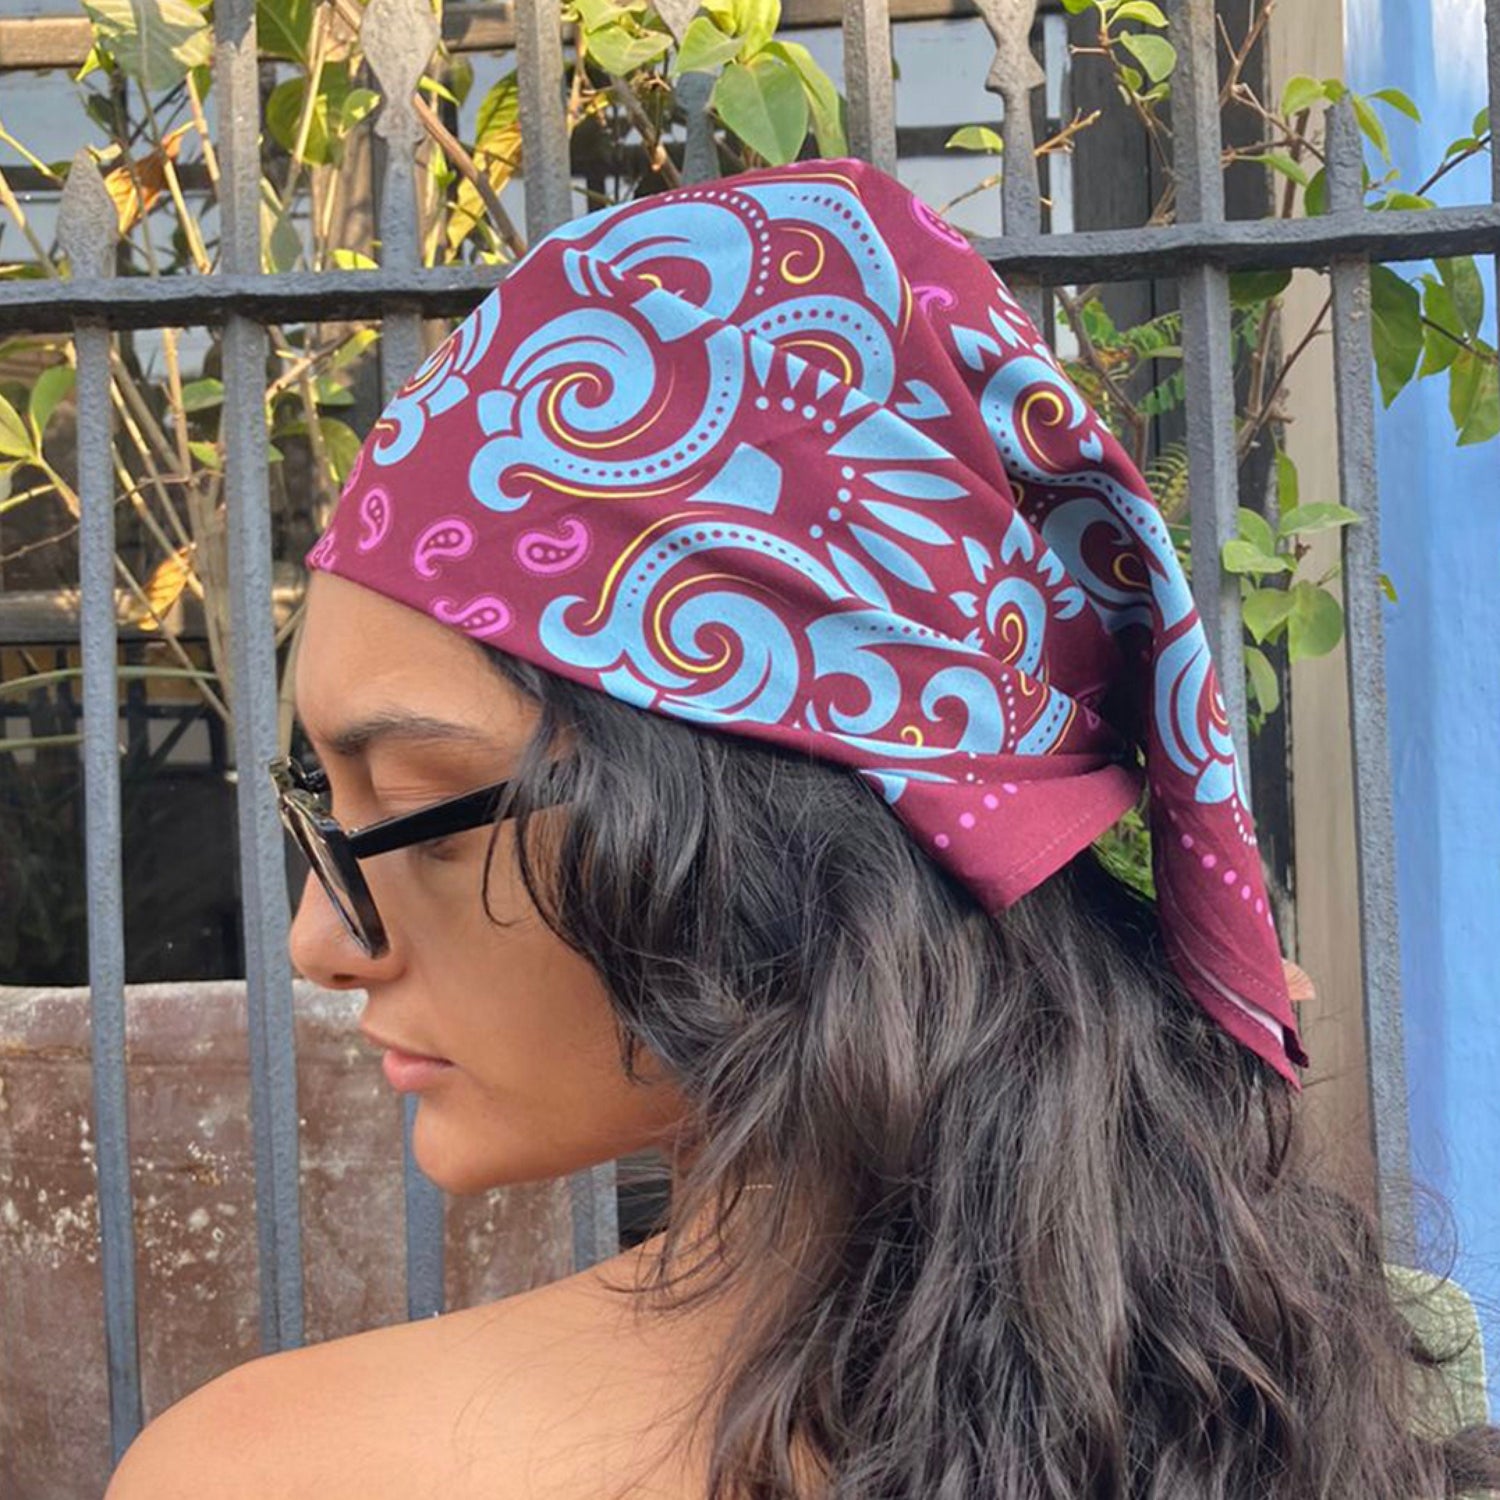 Burgundy Bandana with Ornate Pastel Blue Paisley Design, Head Wrap, Hair Scarf or Neck Scarf fabric square